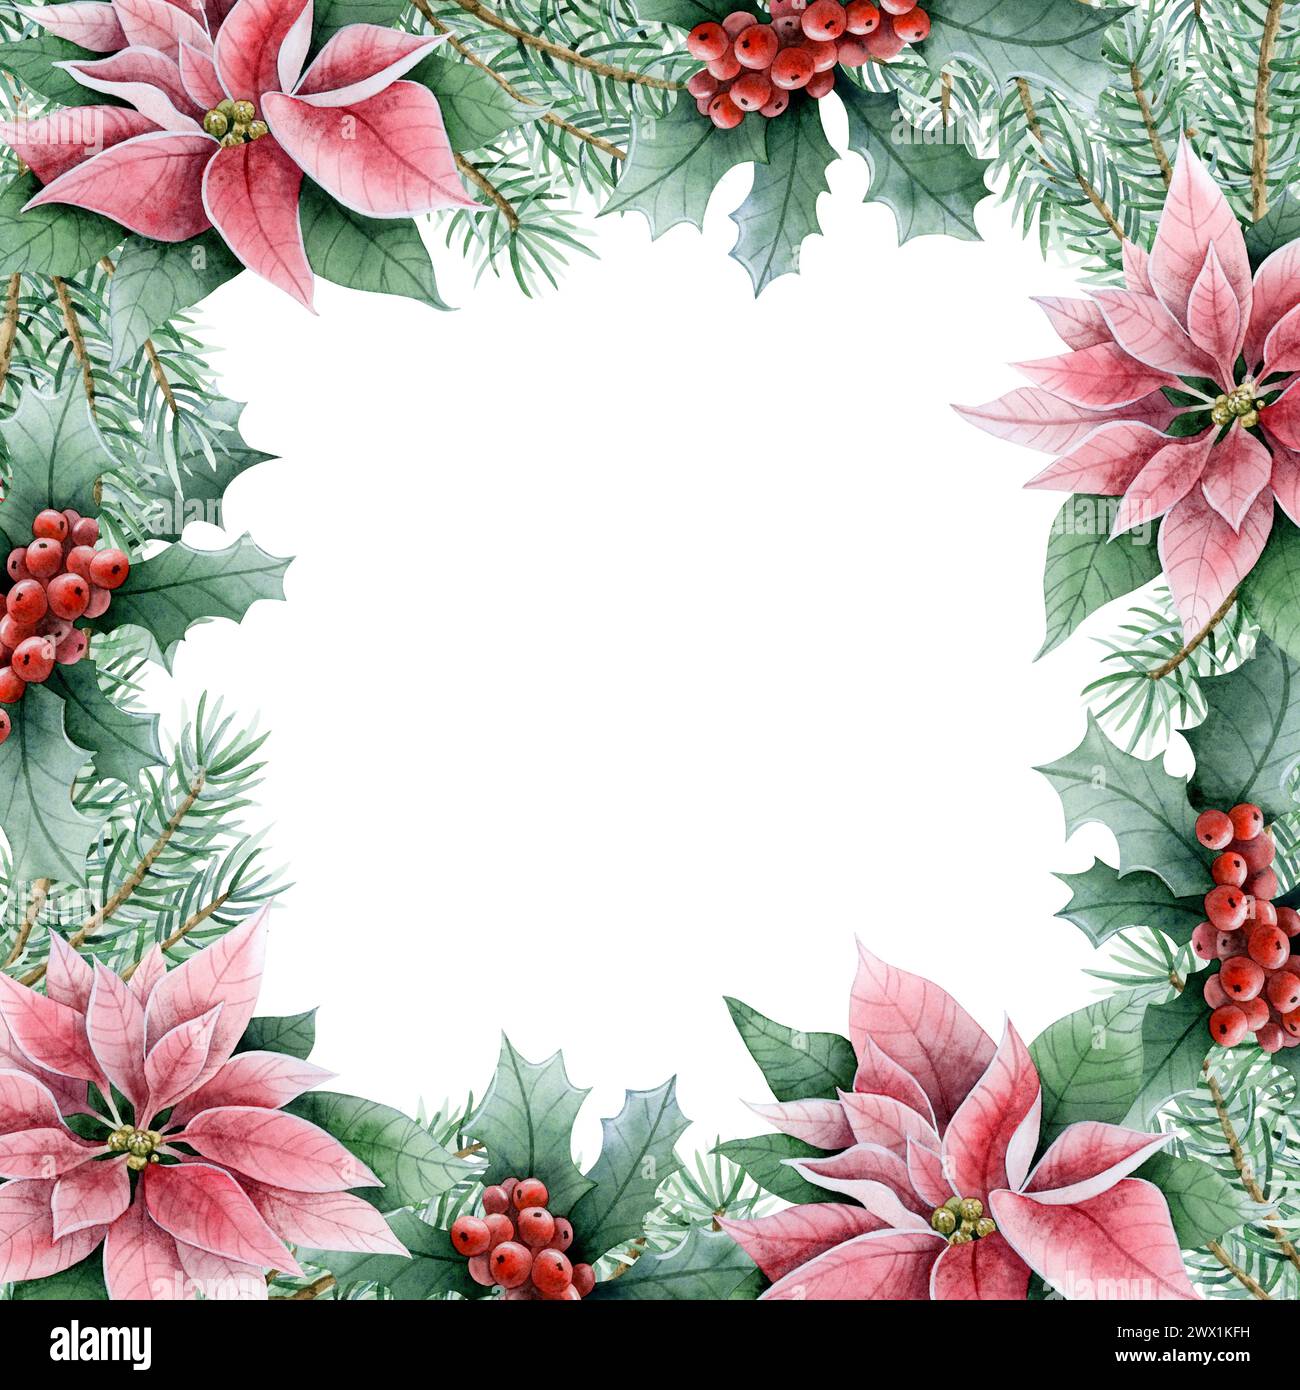 Pink poinsettia flowers, Christmas tree branches and red holly berries square frame watercolor illustration template Stock Photo